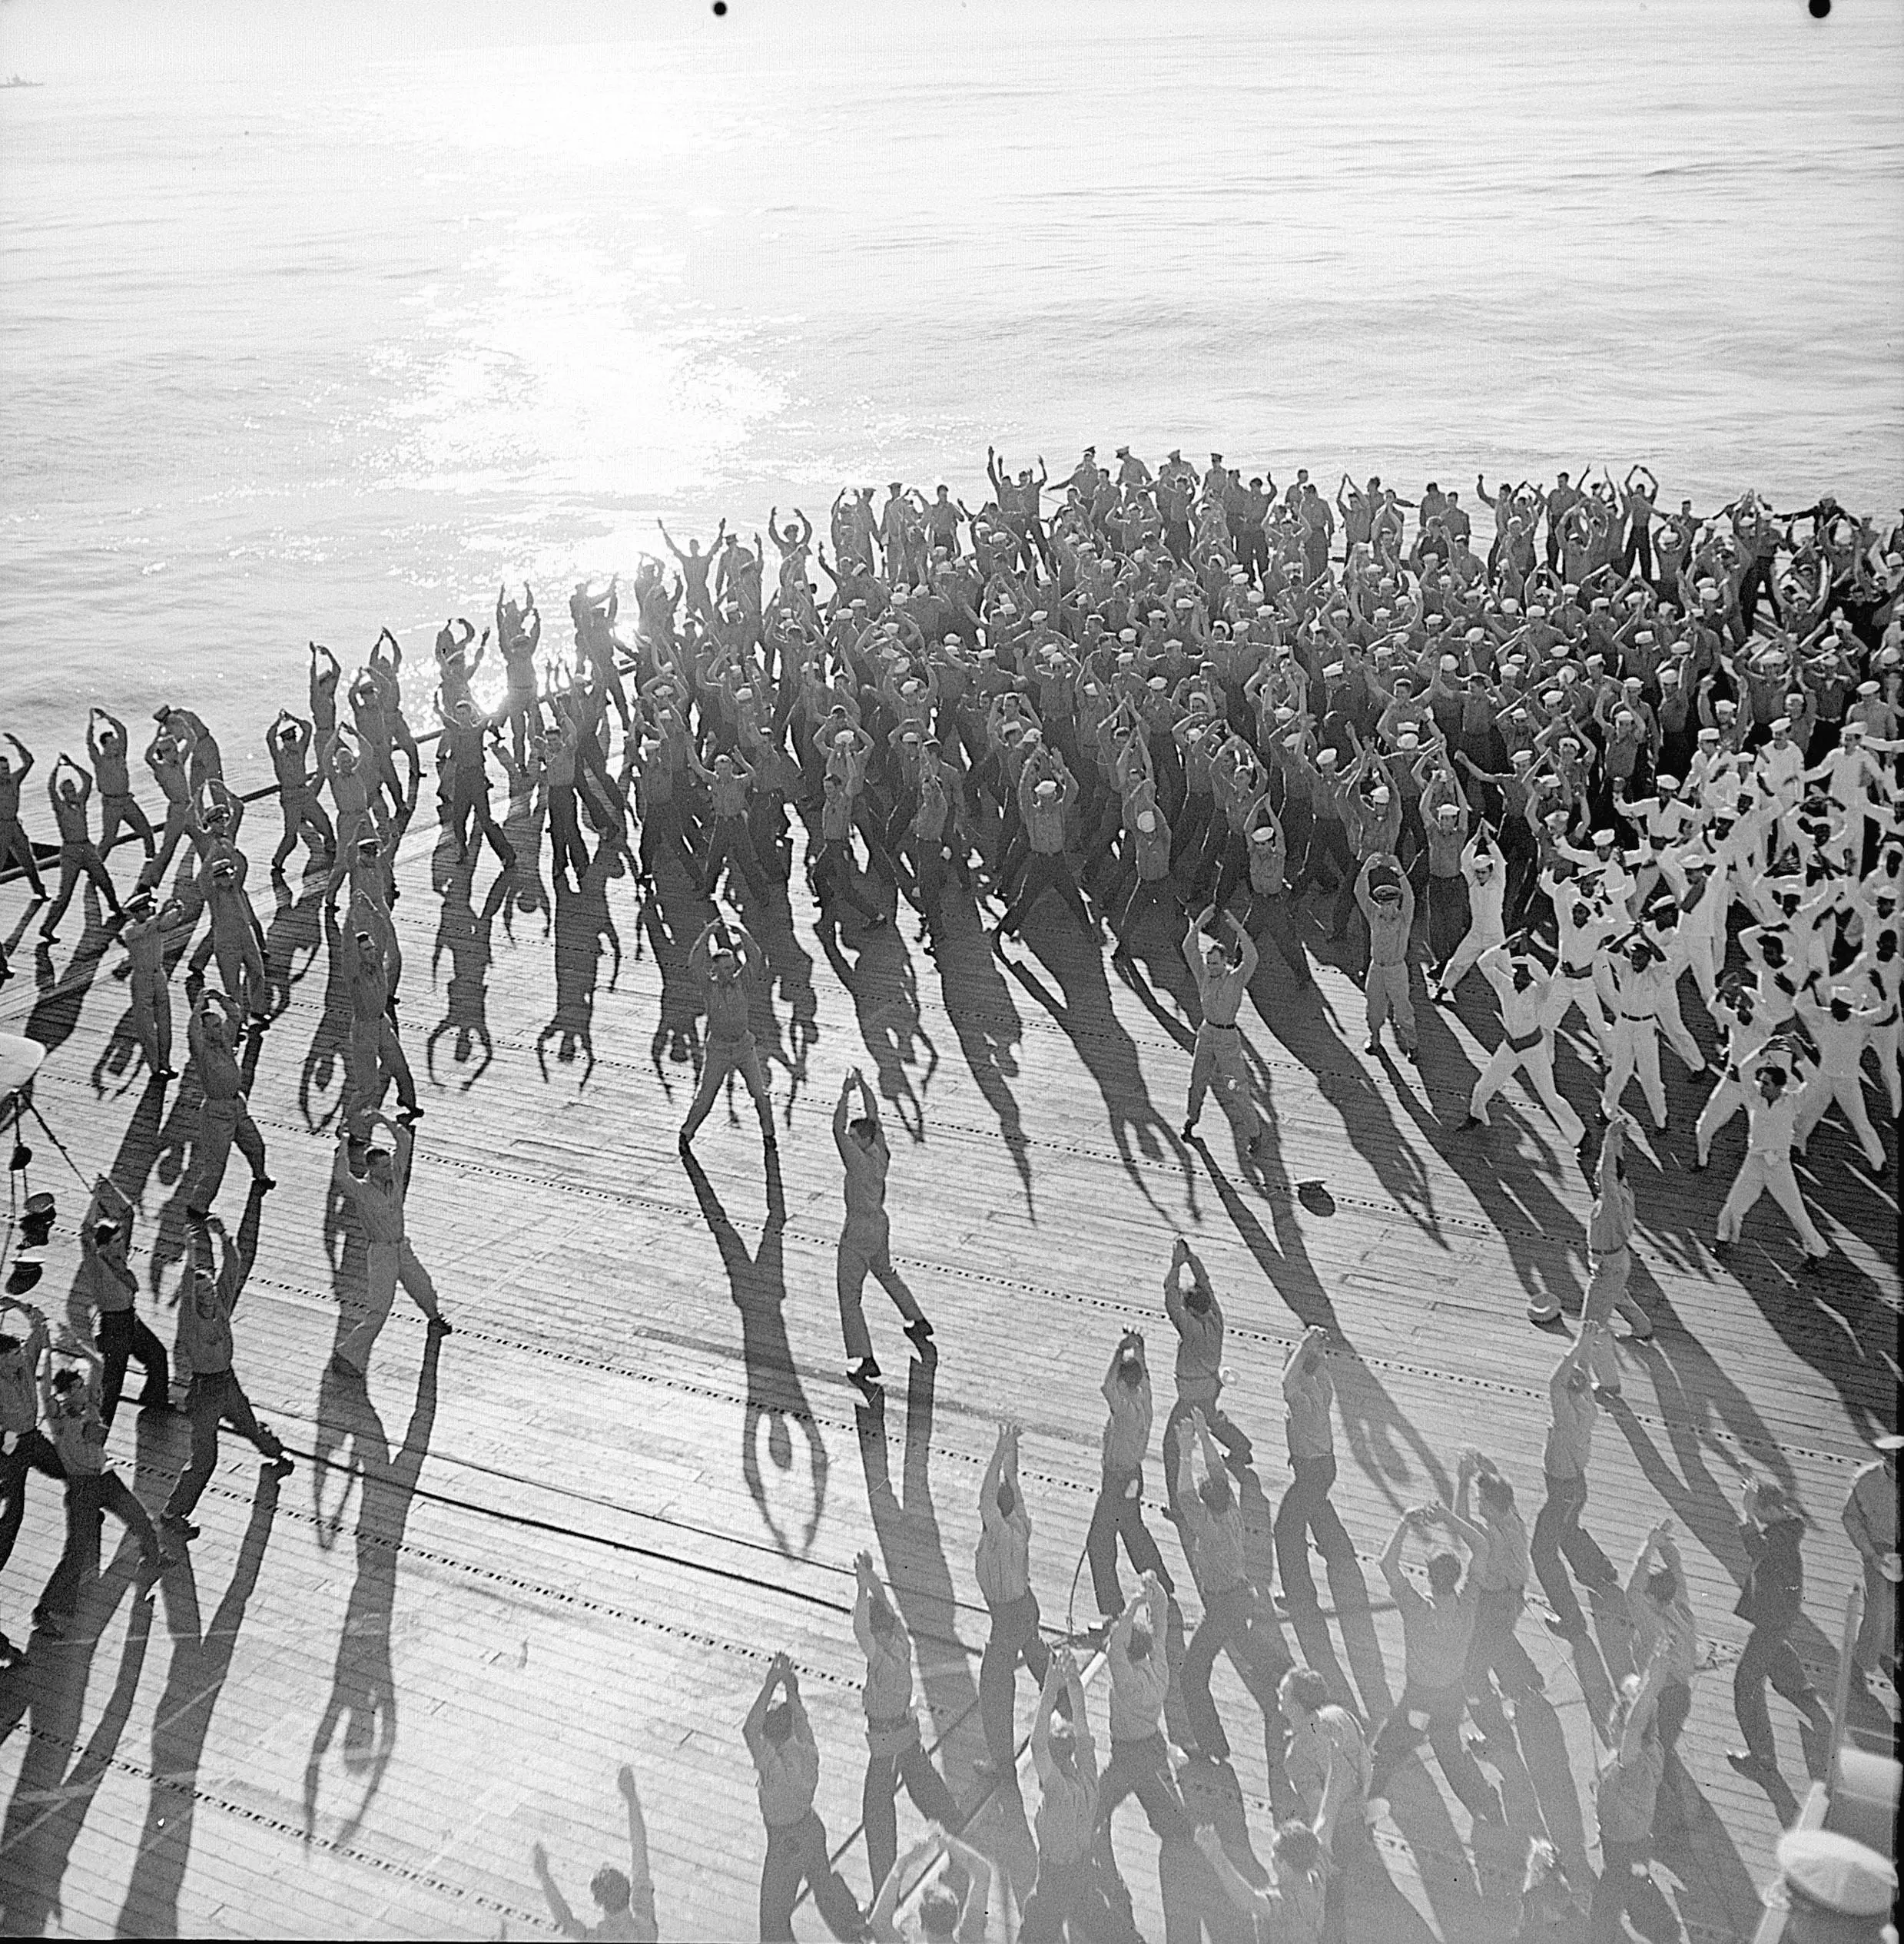 A black and white photograph of the crew of USS Santee doing jumping jacks on the flight deck. Officers in the center appear to be leading the exercises, with over one hundred men around them.